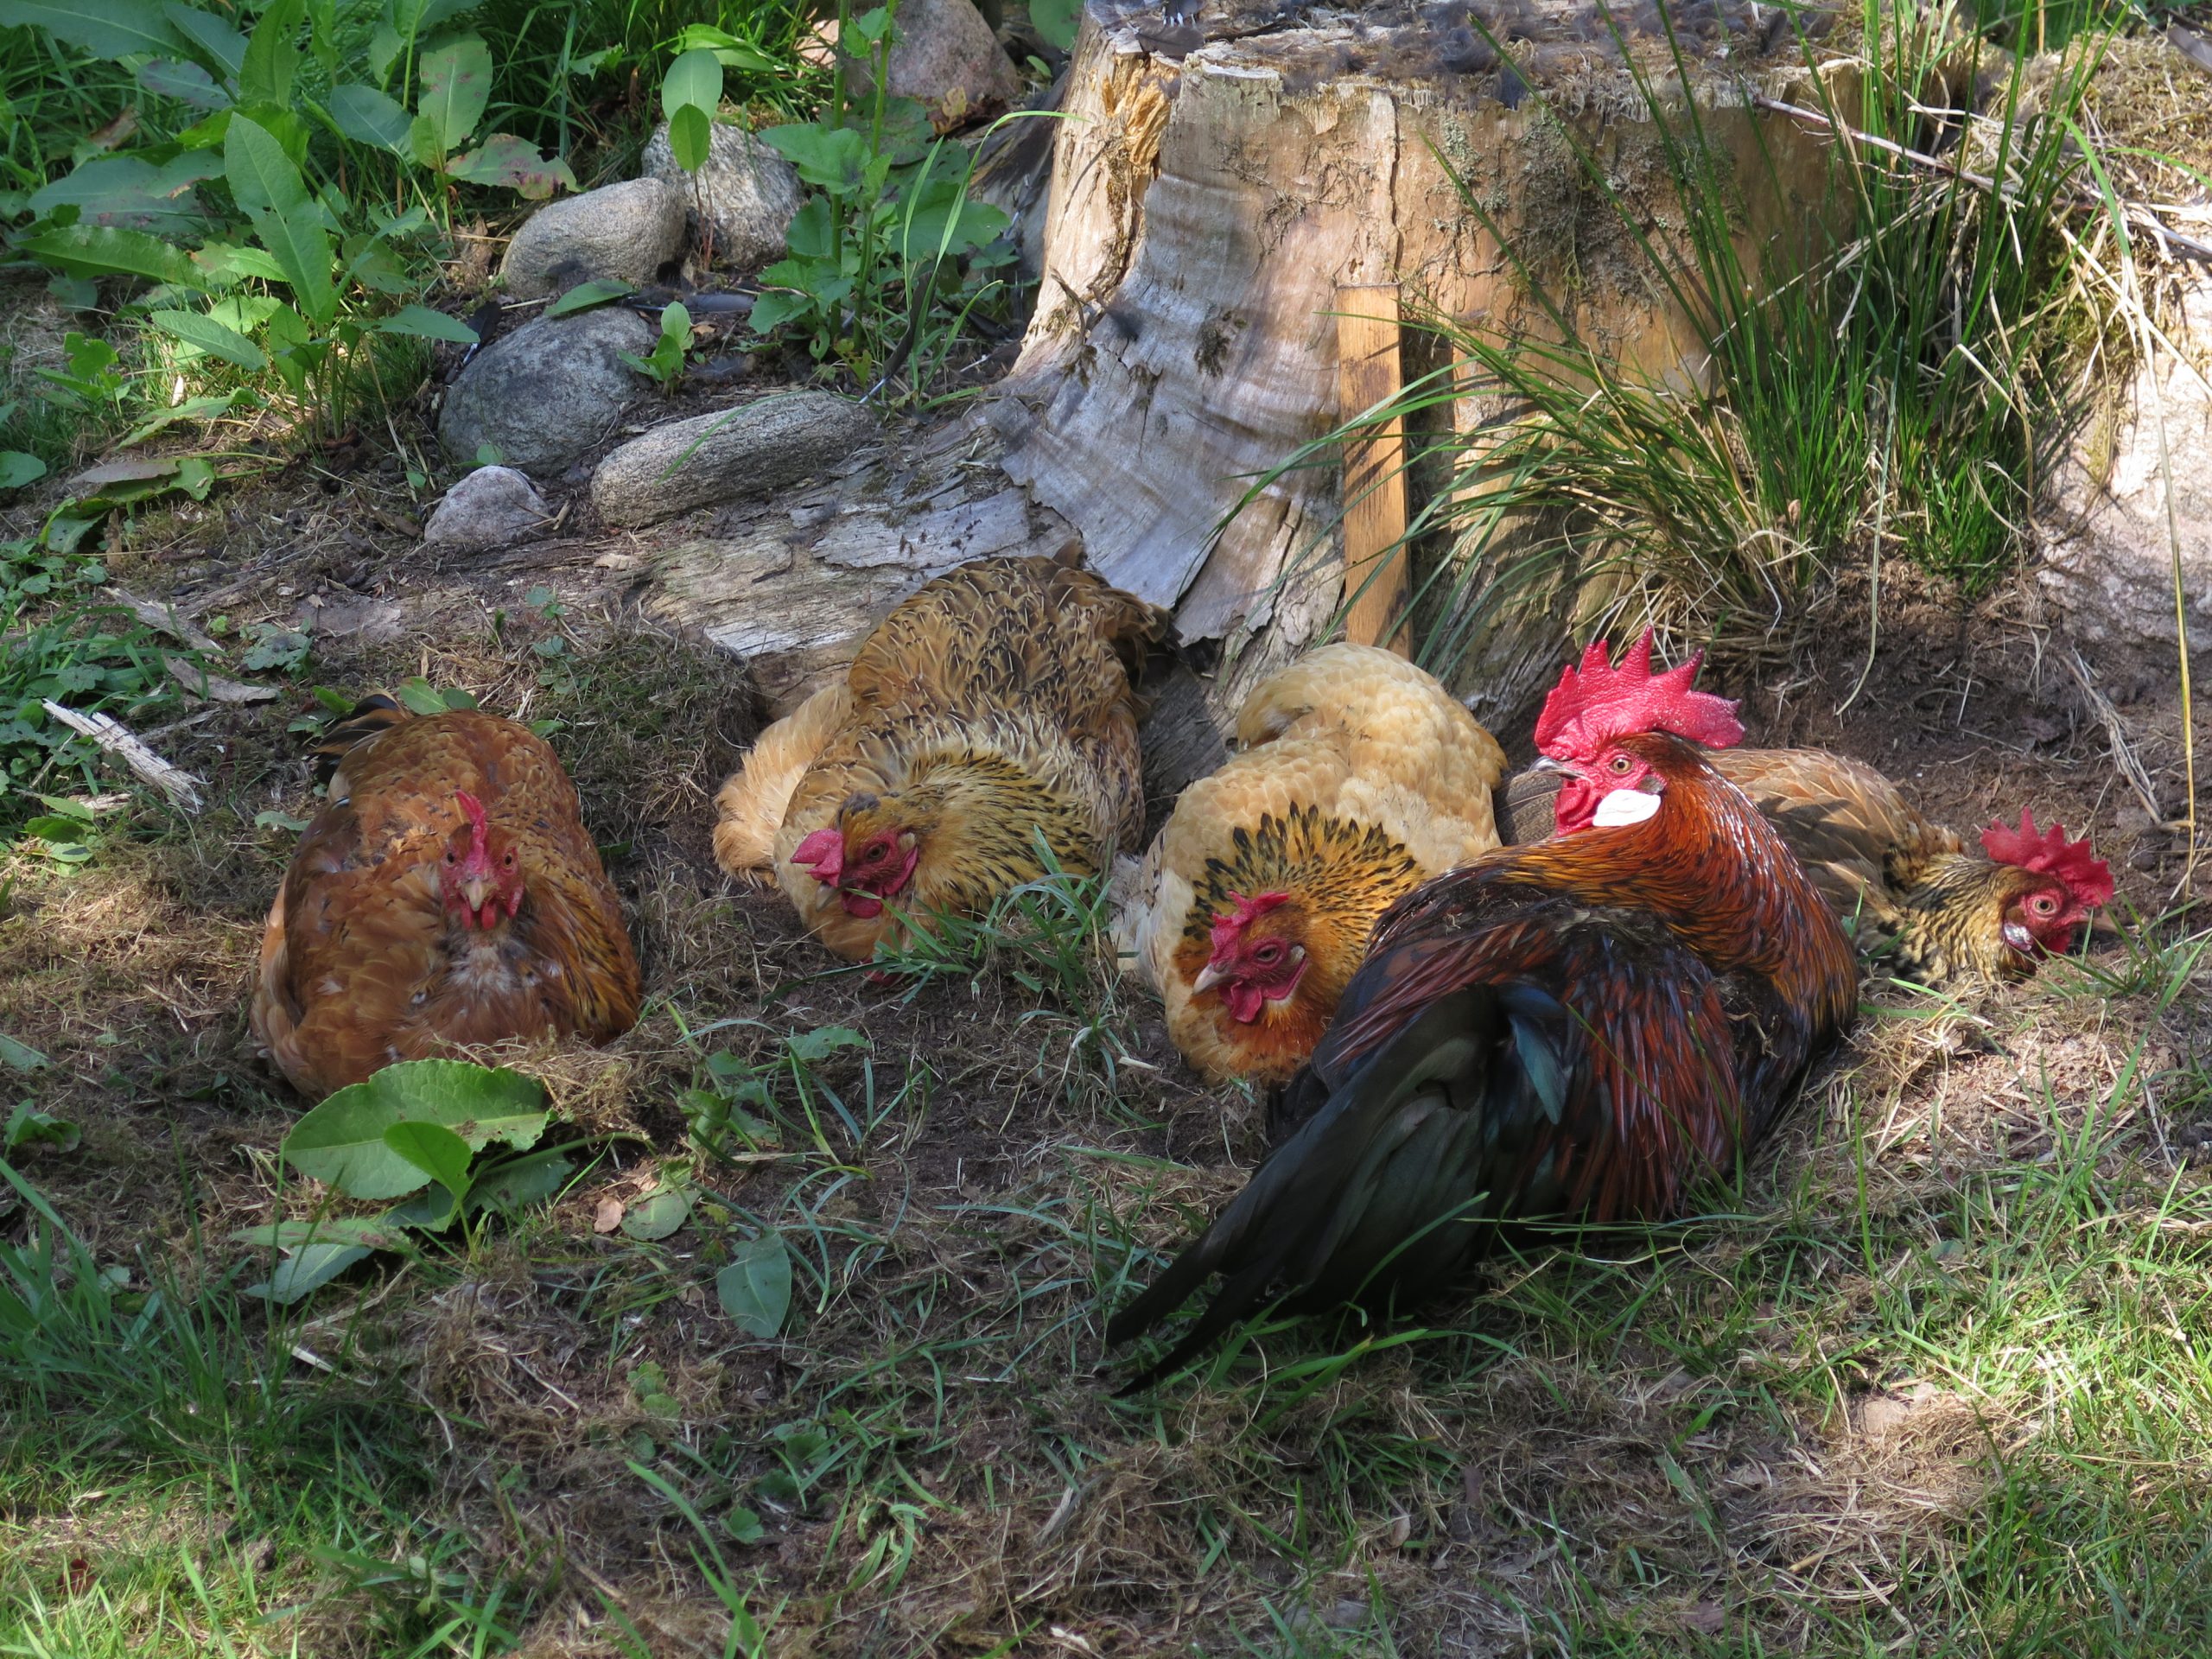 Hens and a roster relaxing in the garden